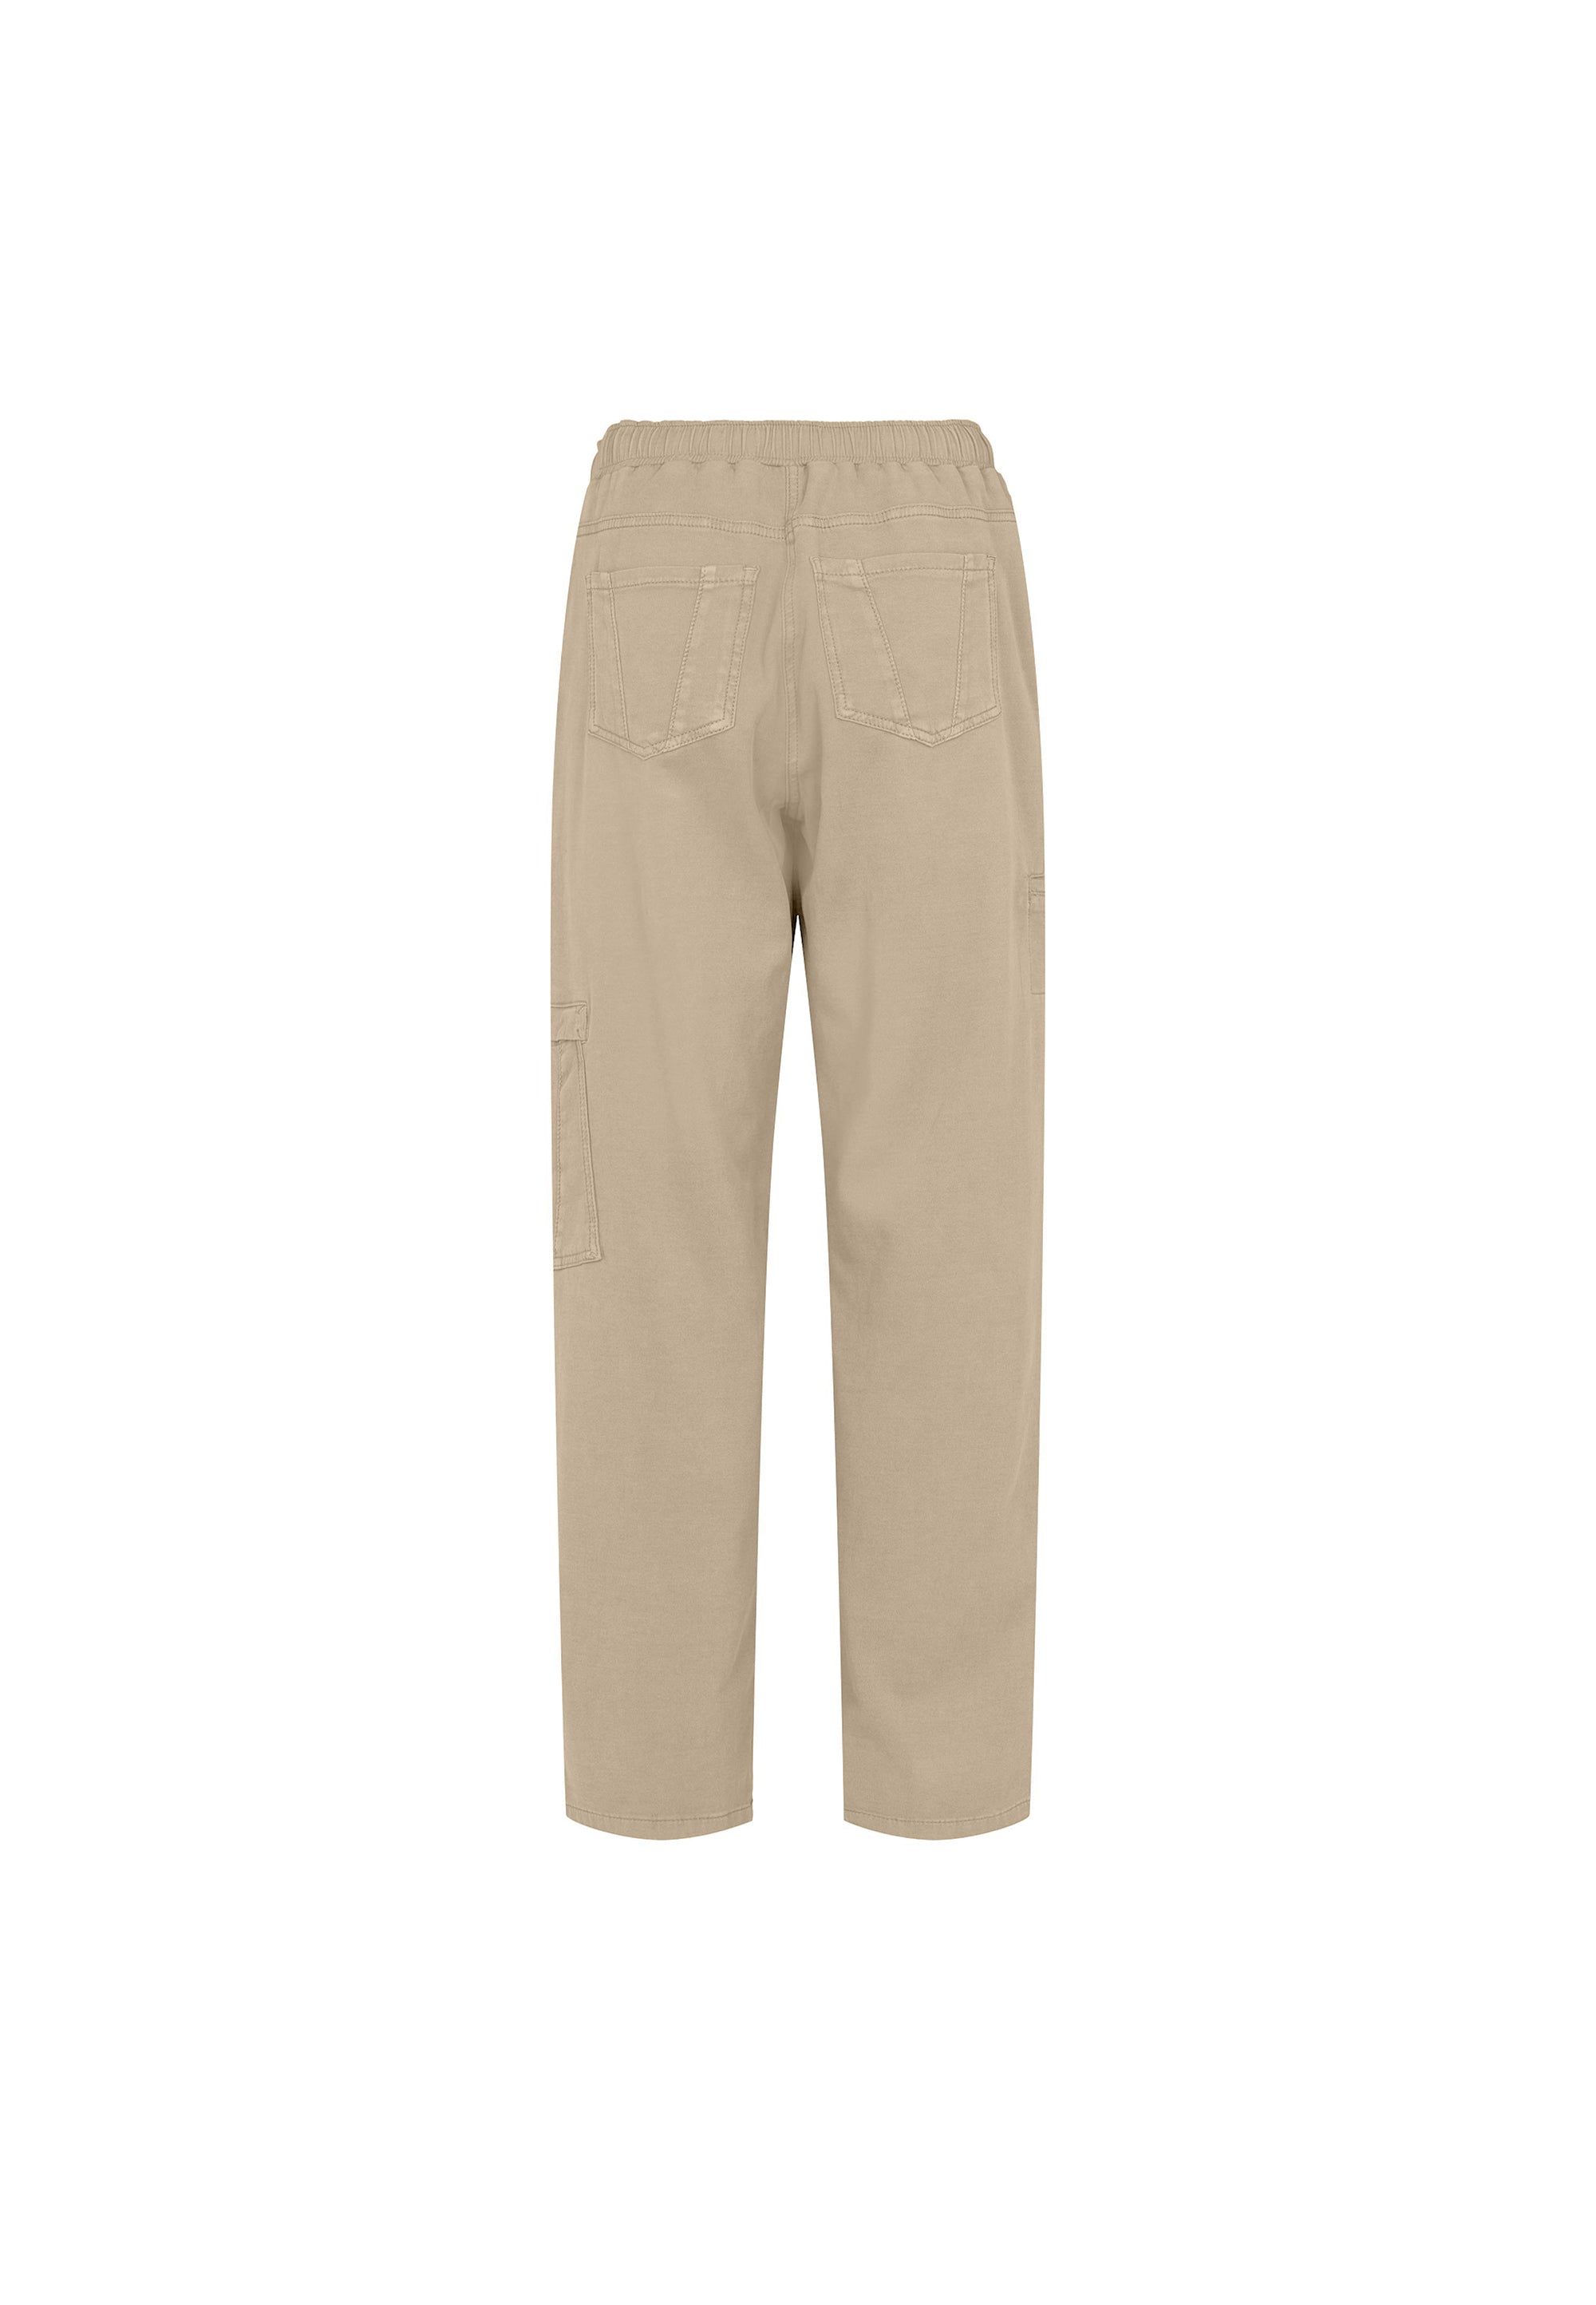 LAURIE Ofelia Cargo Relaxed - Medium Length Trousers RELAXED 26000 Safari